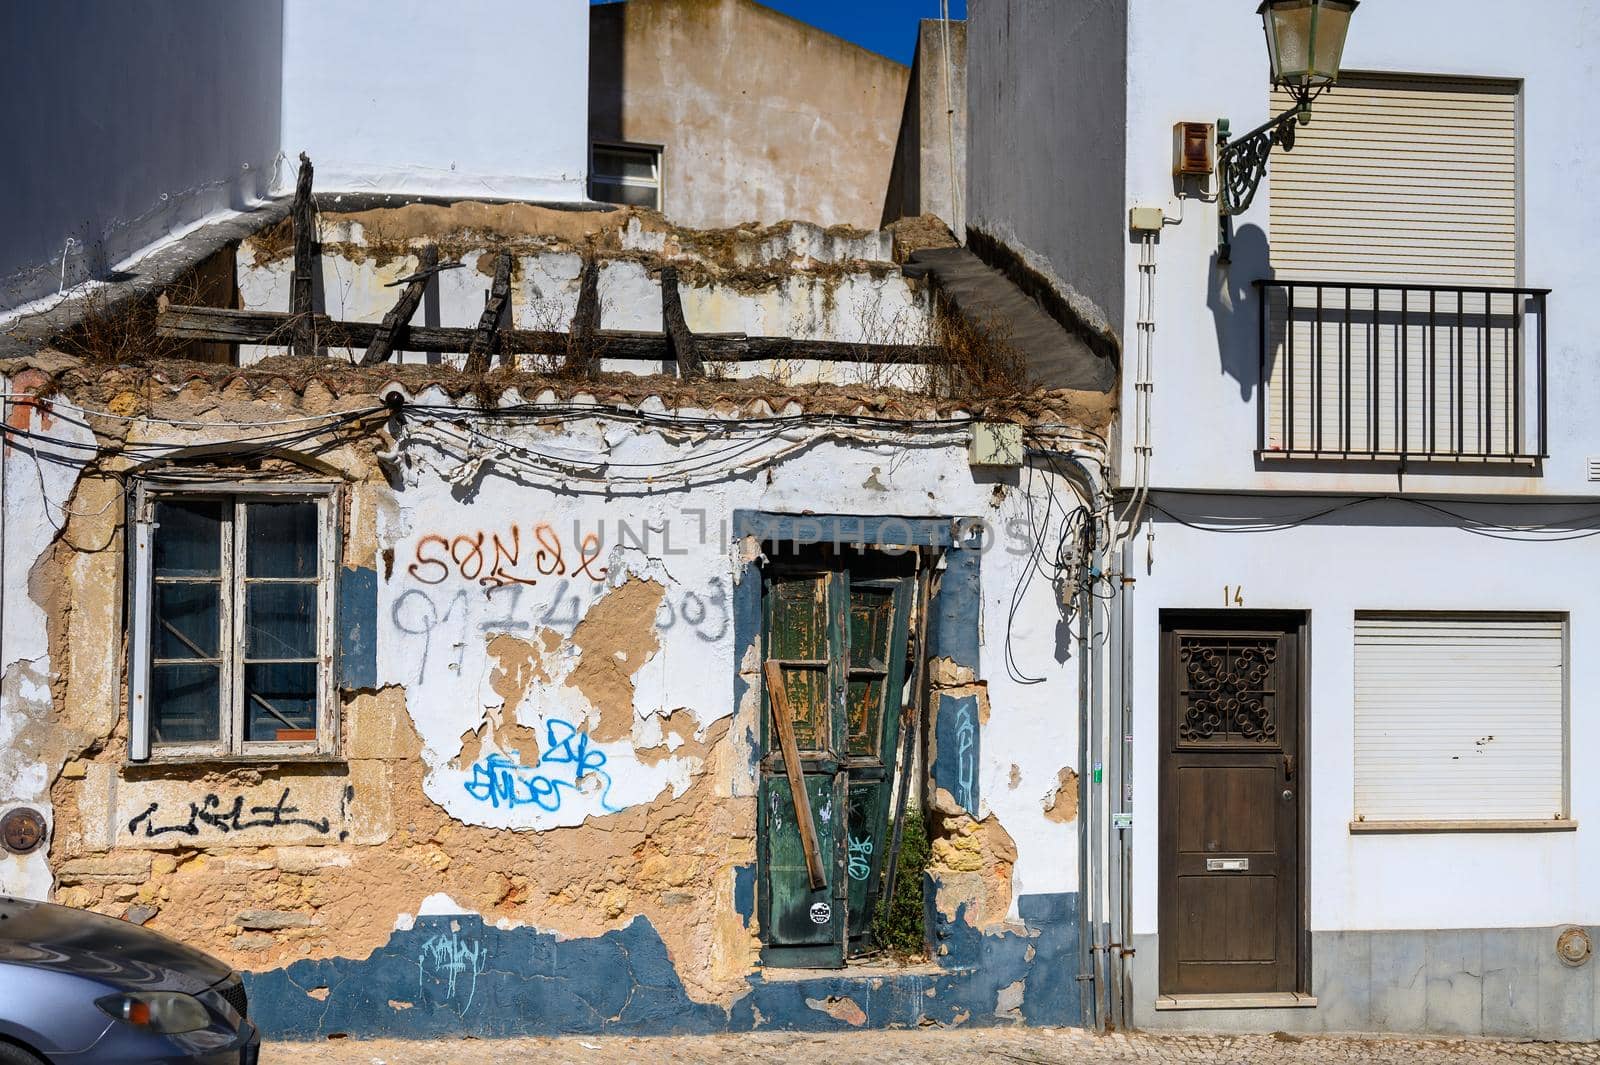 An old uninhabited house decorated with graffiti shortly before it was demolished.